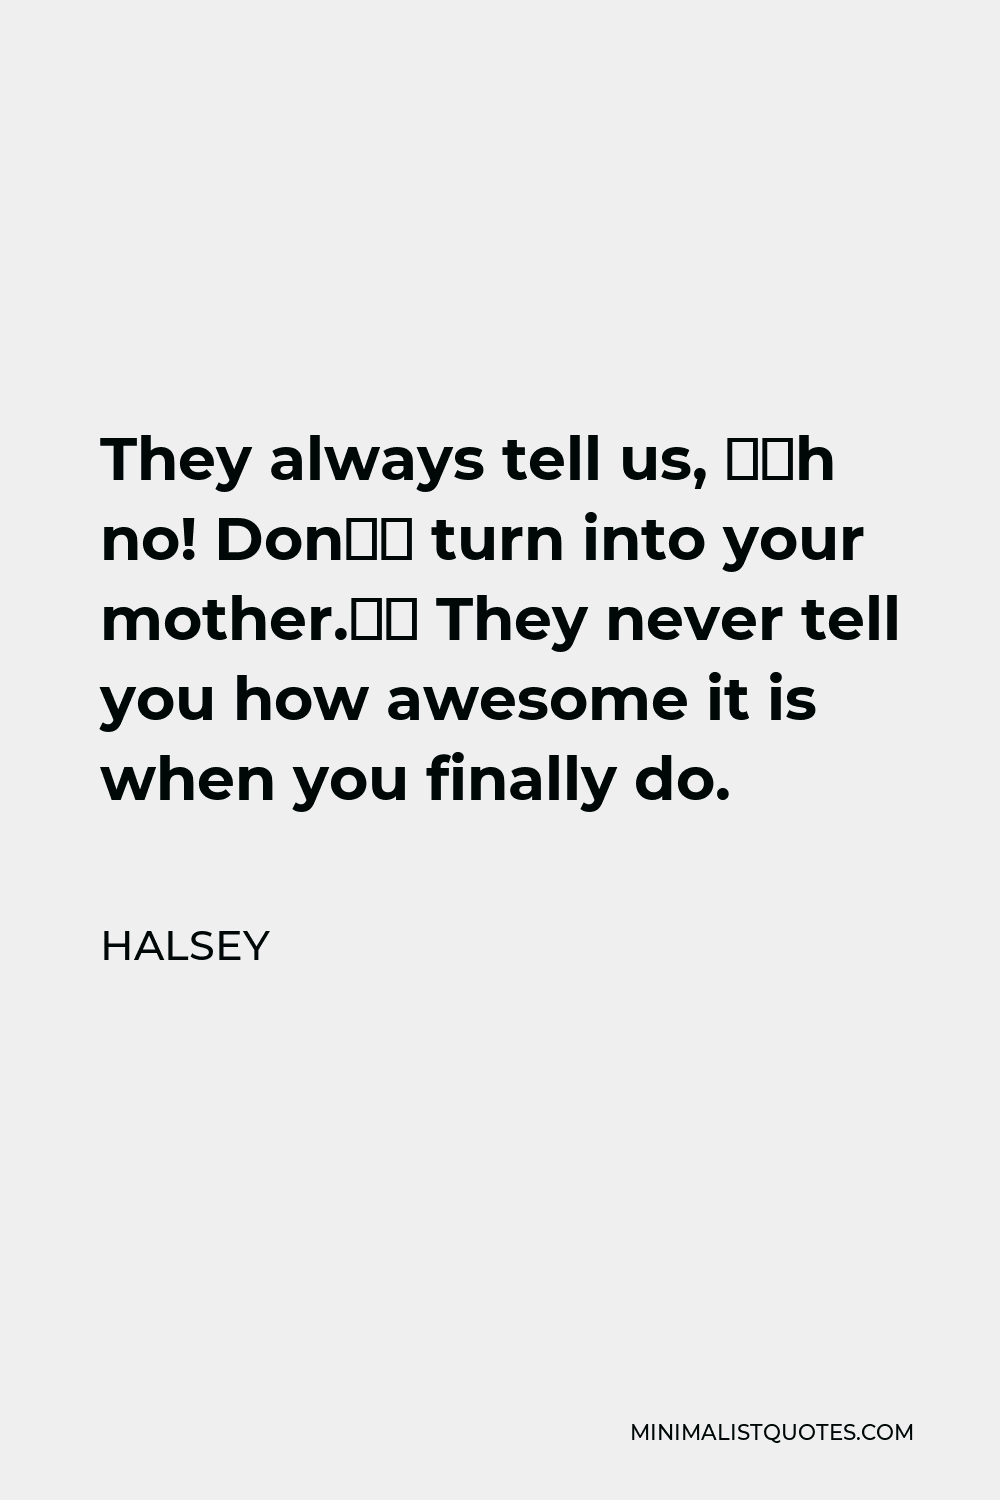 Halsey Quote - They always tell us, “Oh no! Don’t turn into your mother.” They never tell you how awesome it is when you finally do.